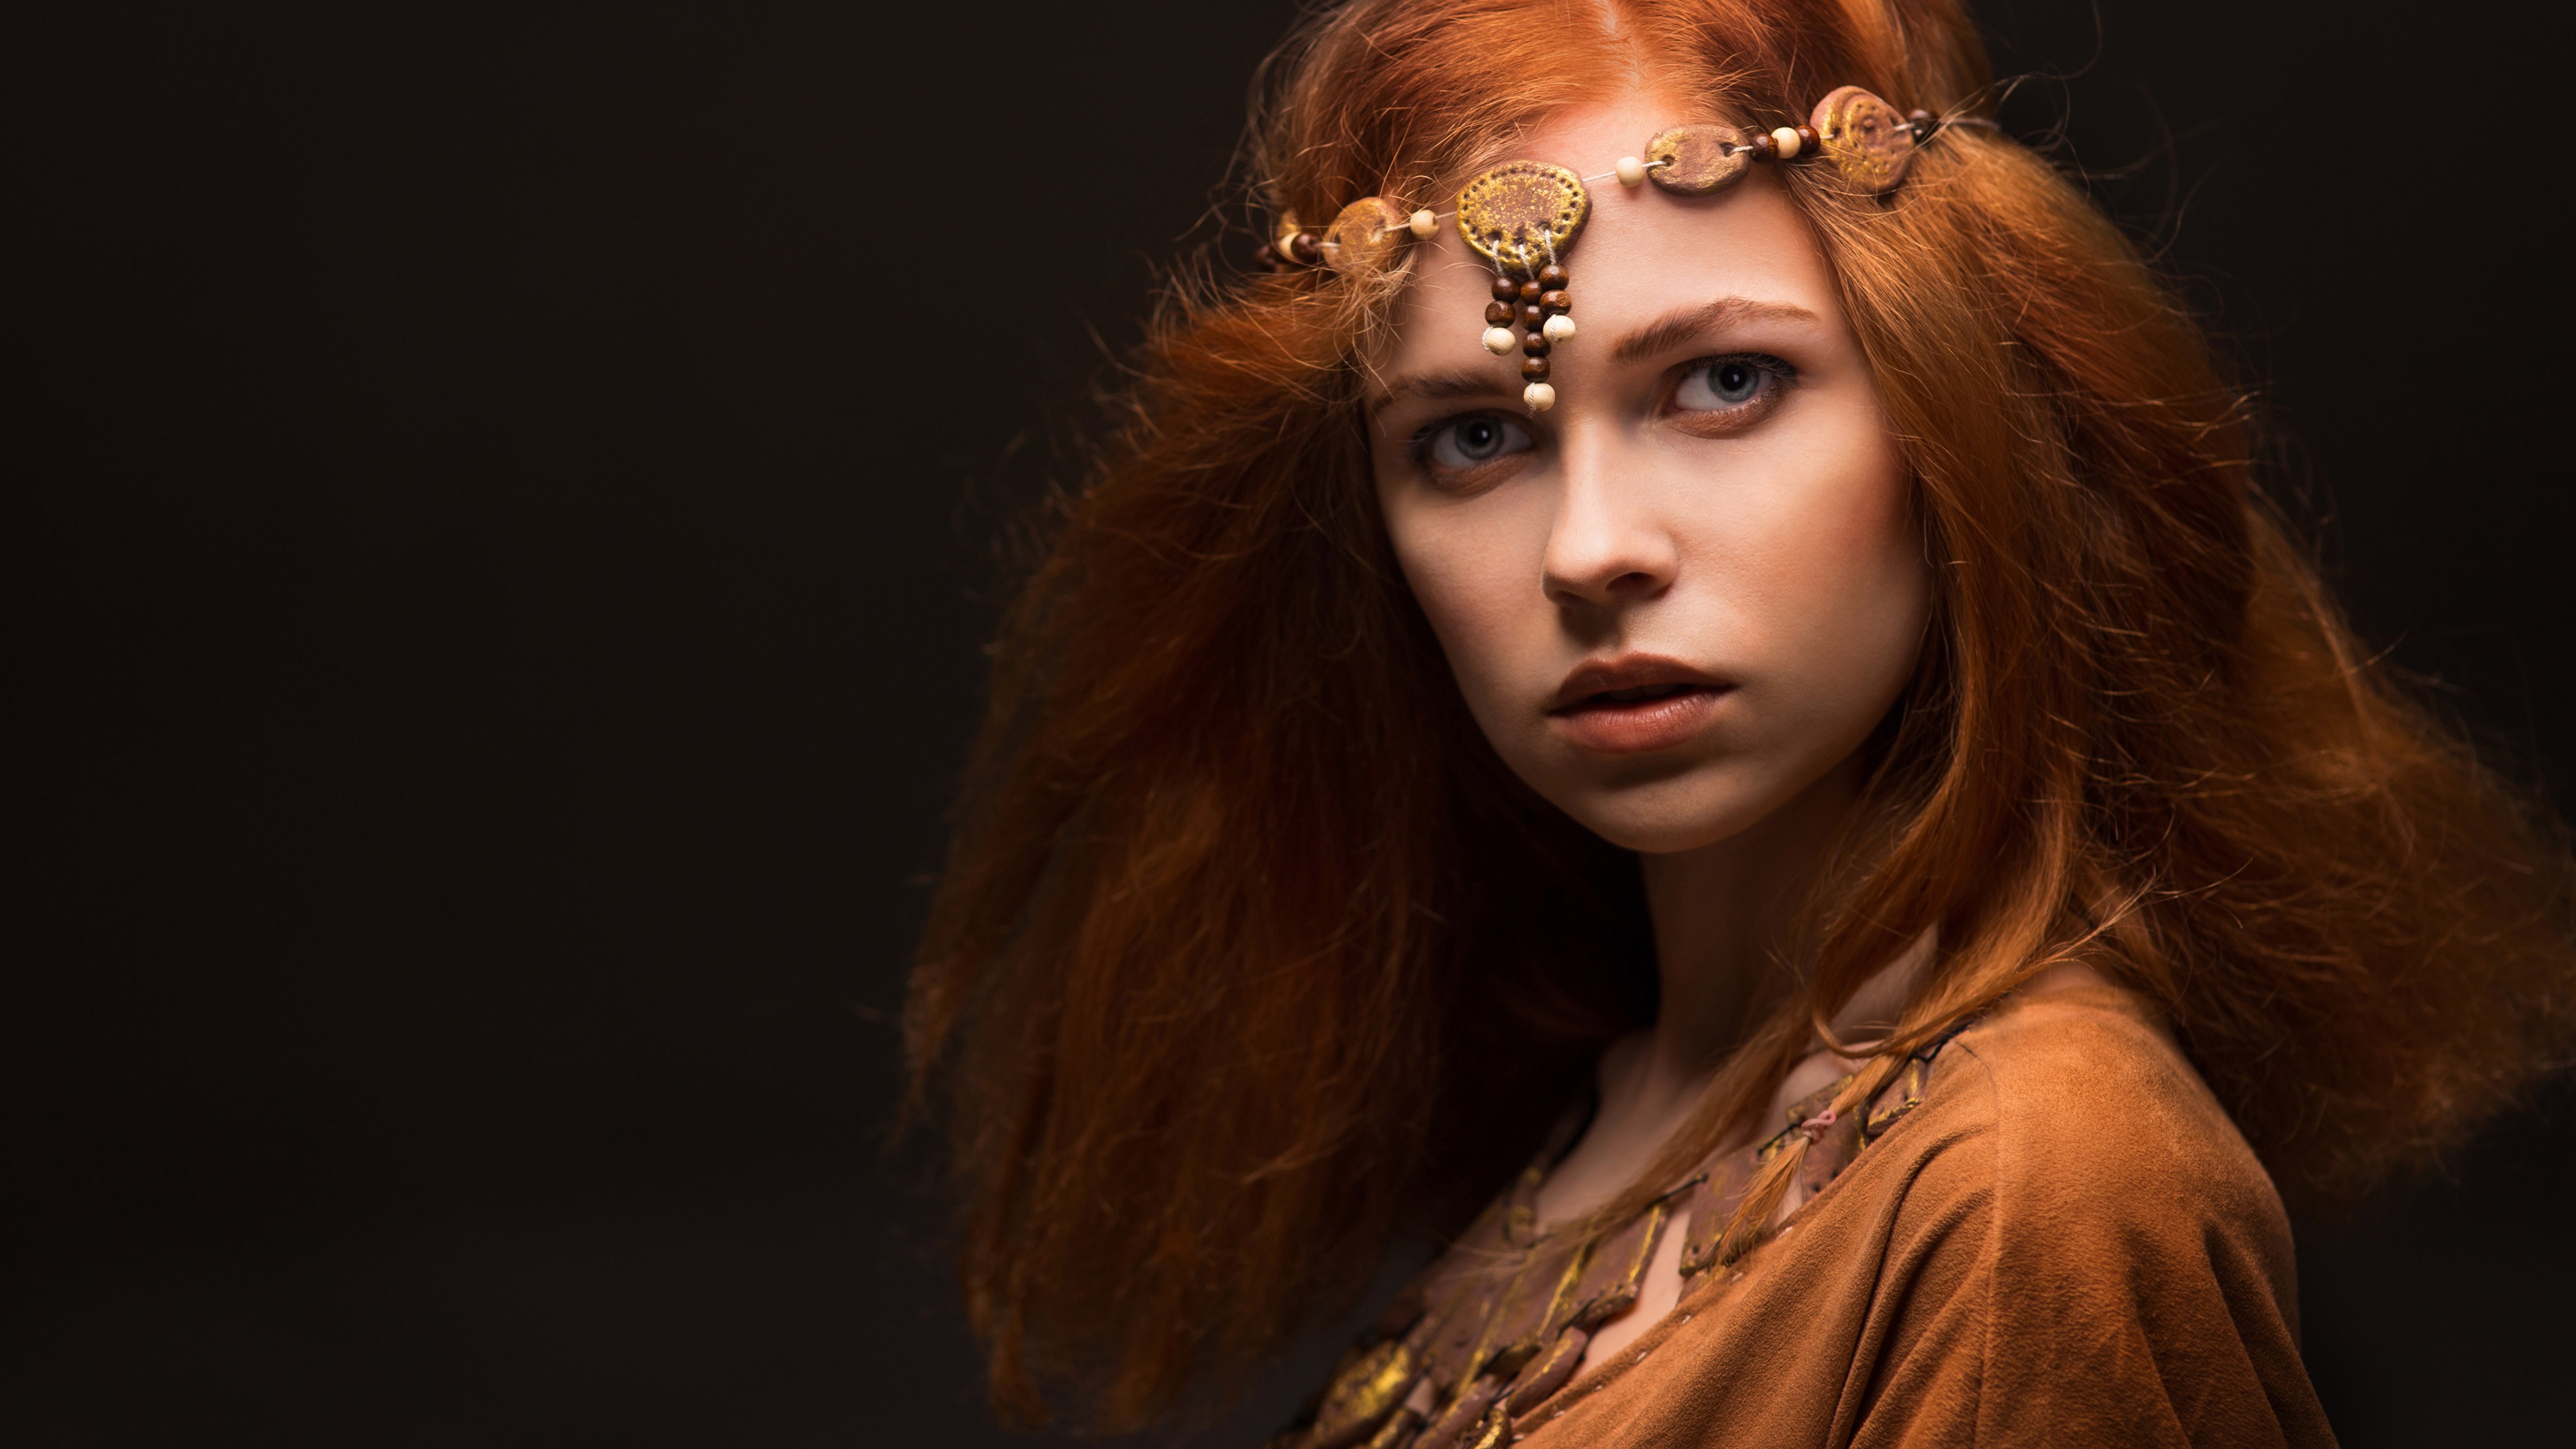 Wallpaper Beautiful red hair girl, middle ages style 3840x2160 UHD 4K Picture, Image